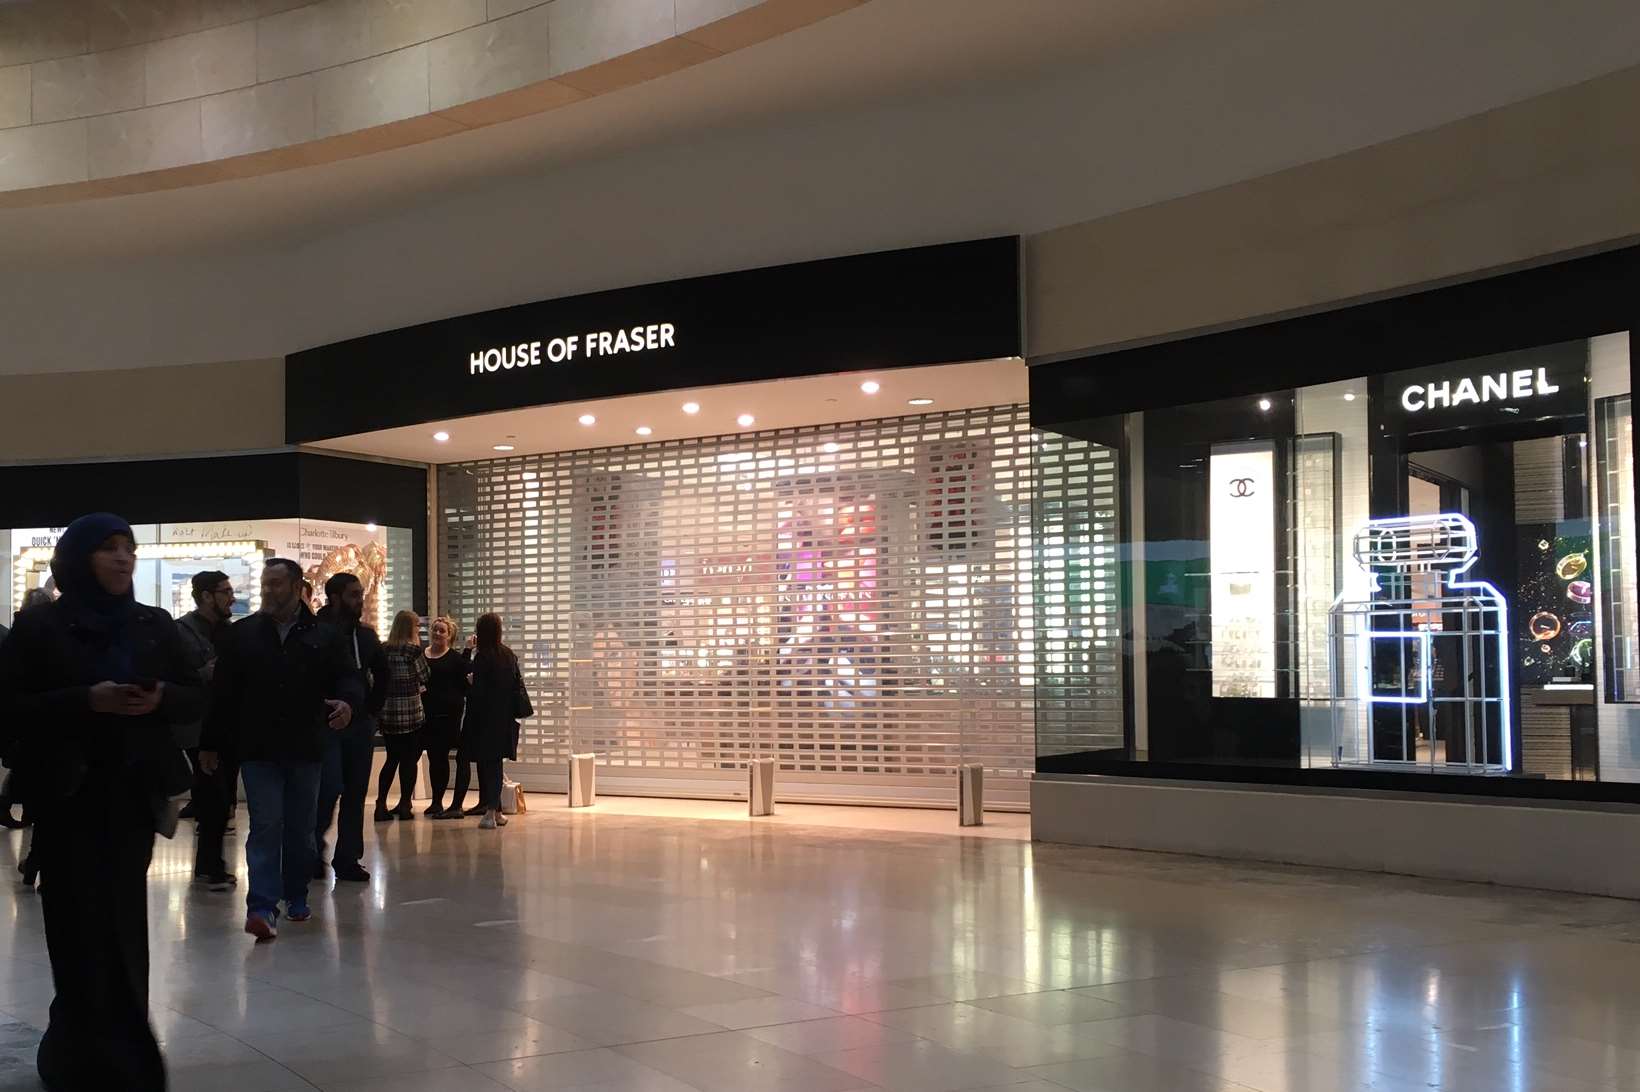 The shutters have been closed at House of Fraser